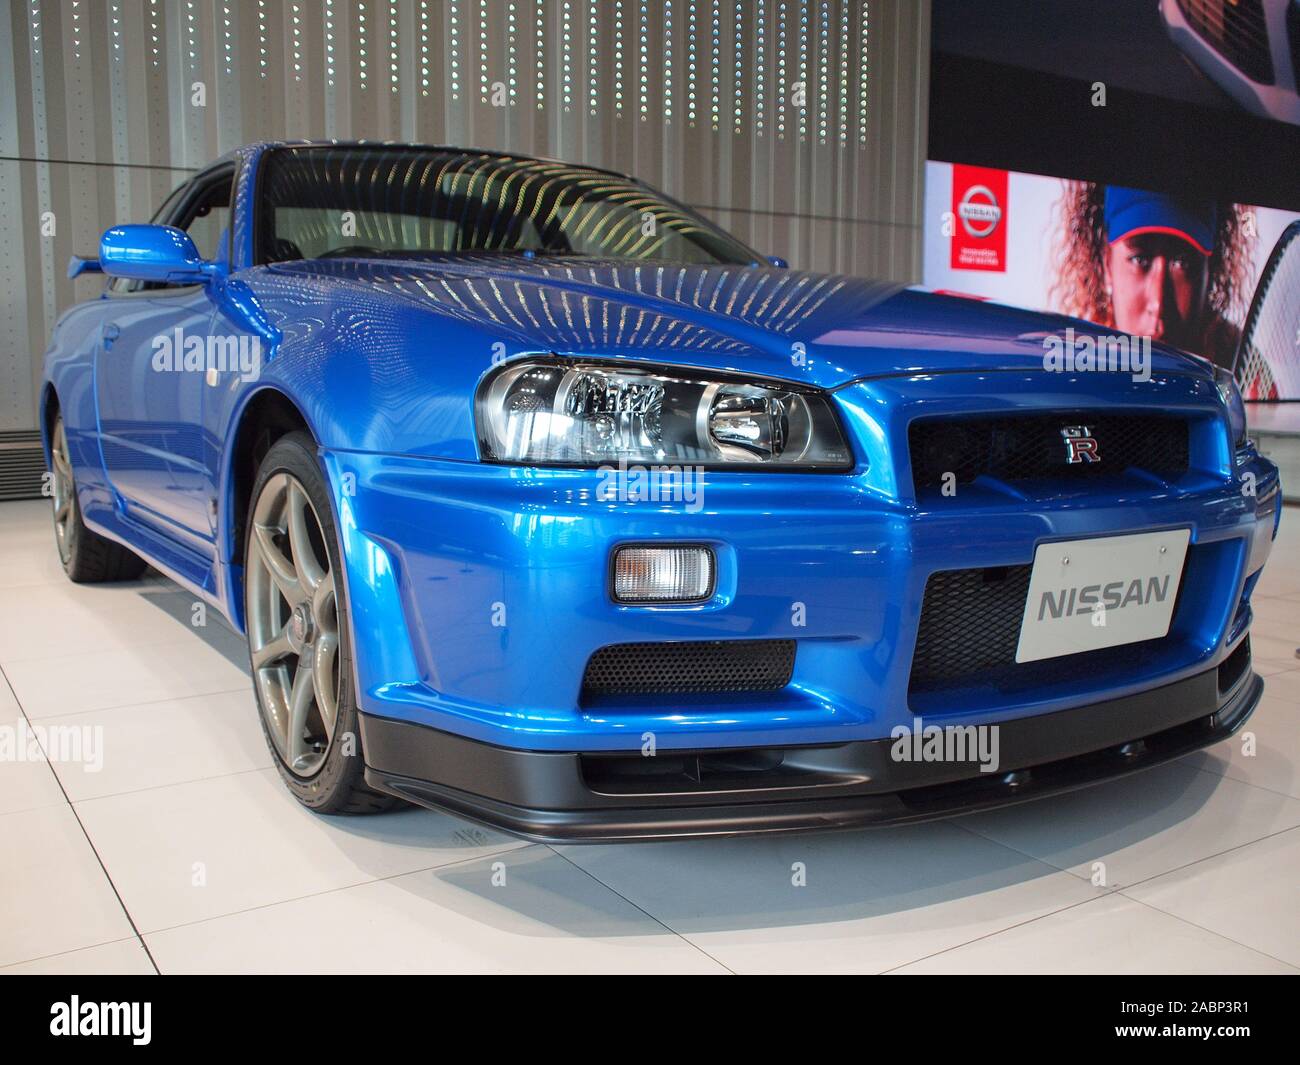 YOKOHAMA, JAPAN - July 2nd, 2019: 2000 Nissan Skyline GT-R V-spec II, one of the cars exhibited at the Nissan Global Headquarters Gallery. Stock Photo